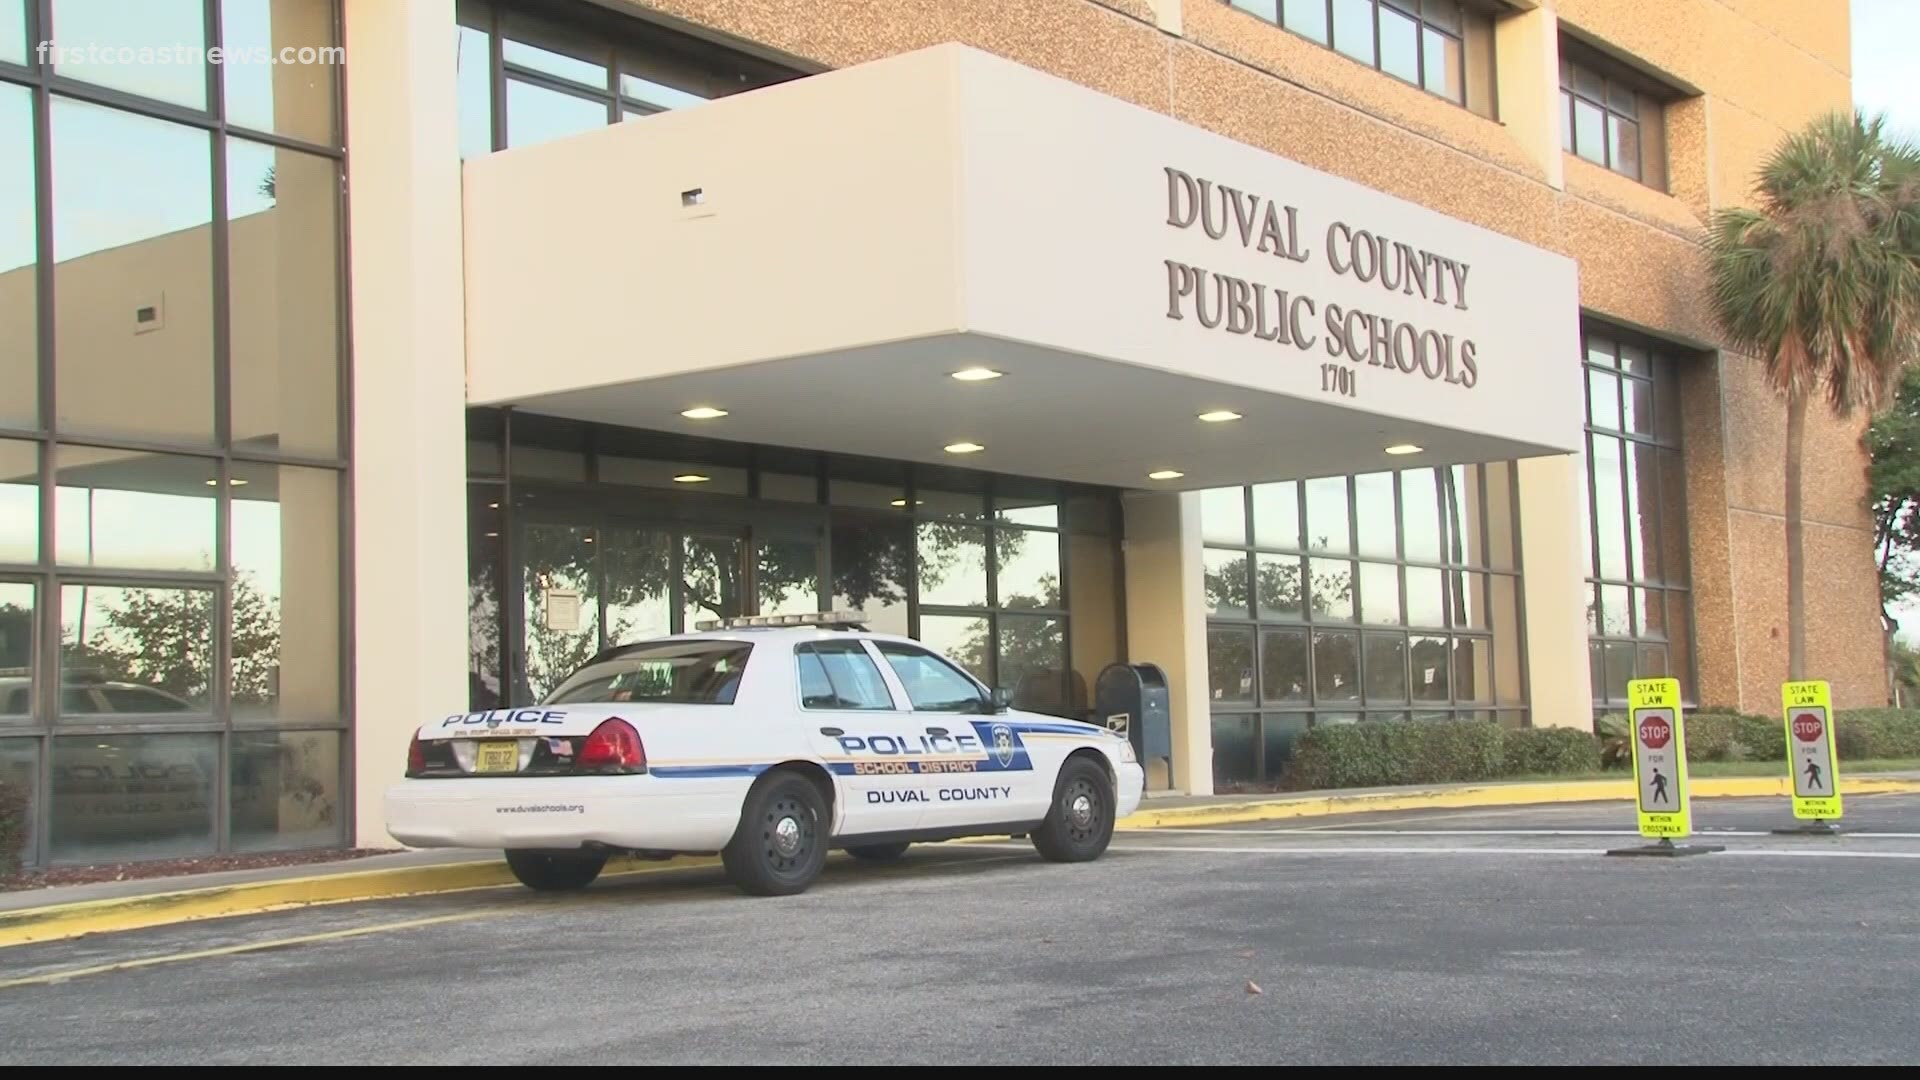 DCPS speaks out following protest, reported social media threats